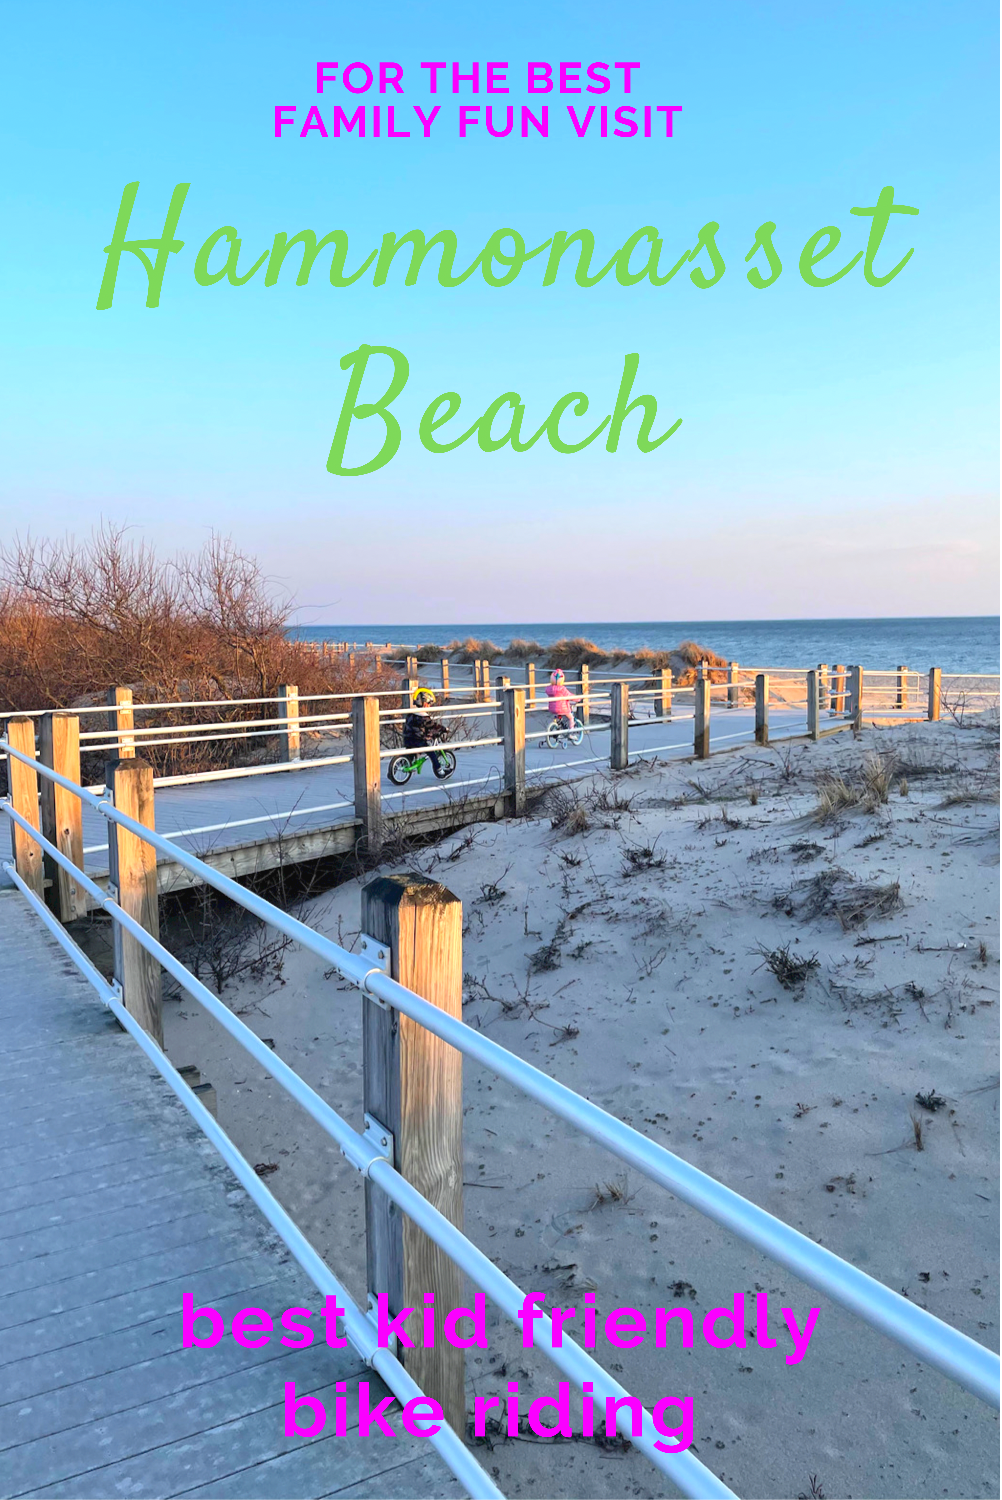 Hammonasset Beach is a beautiful coastal location to enjoy with the entire family